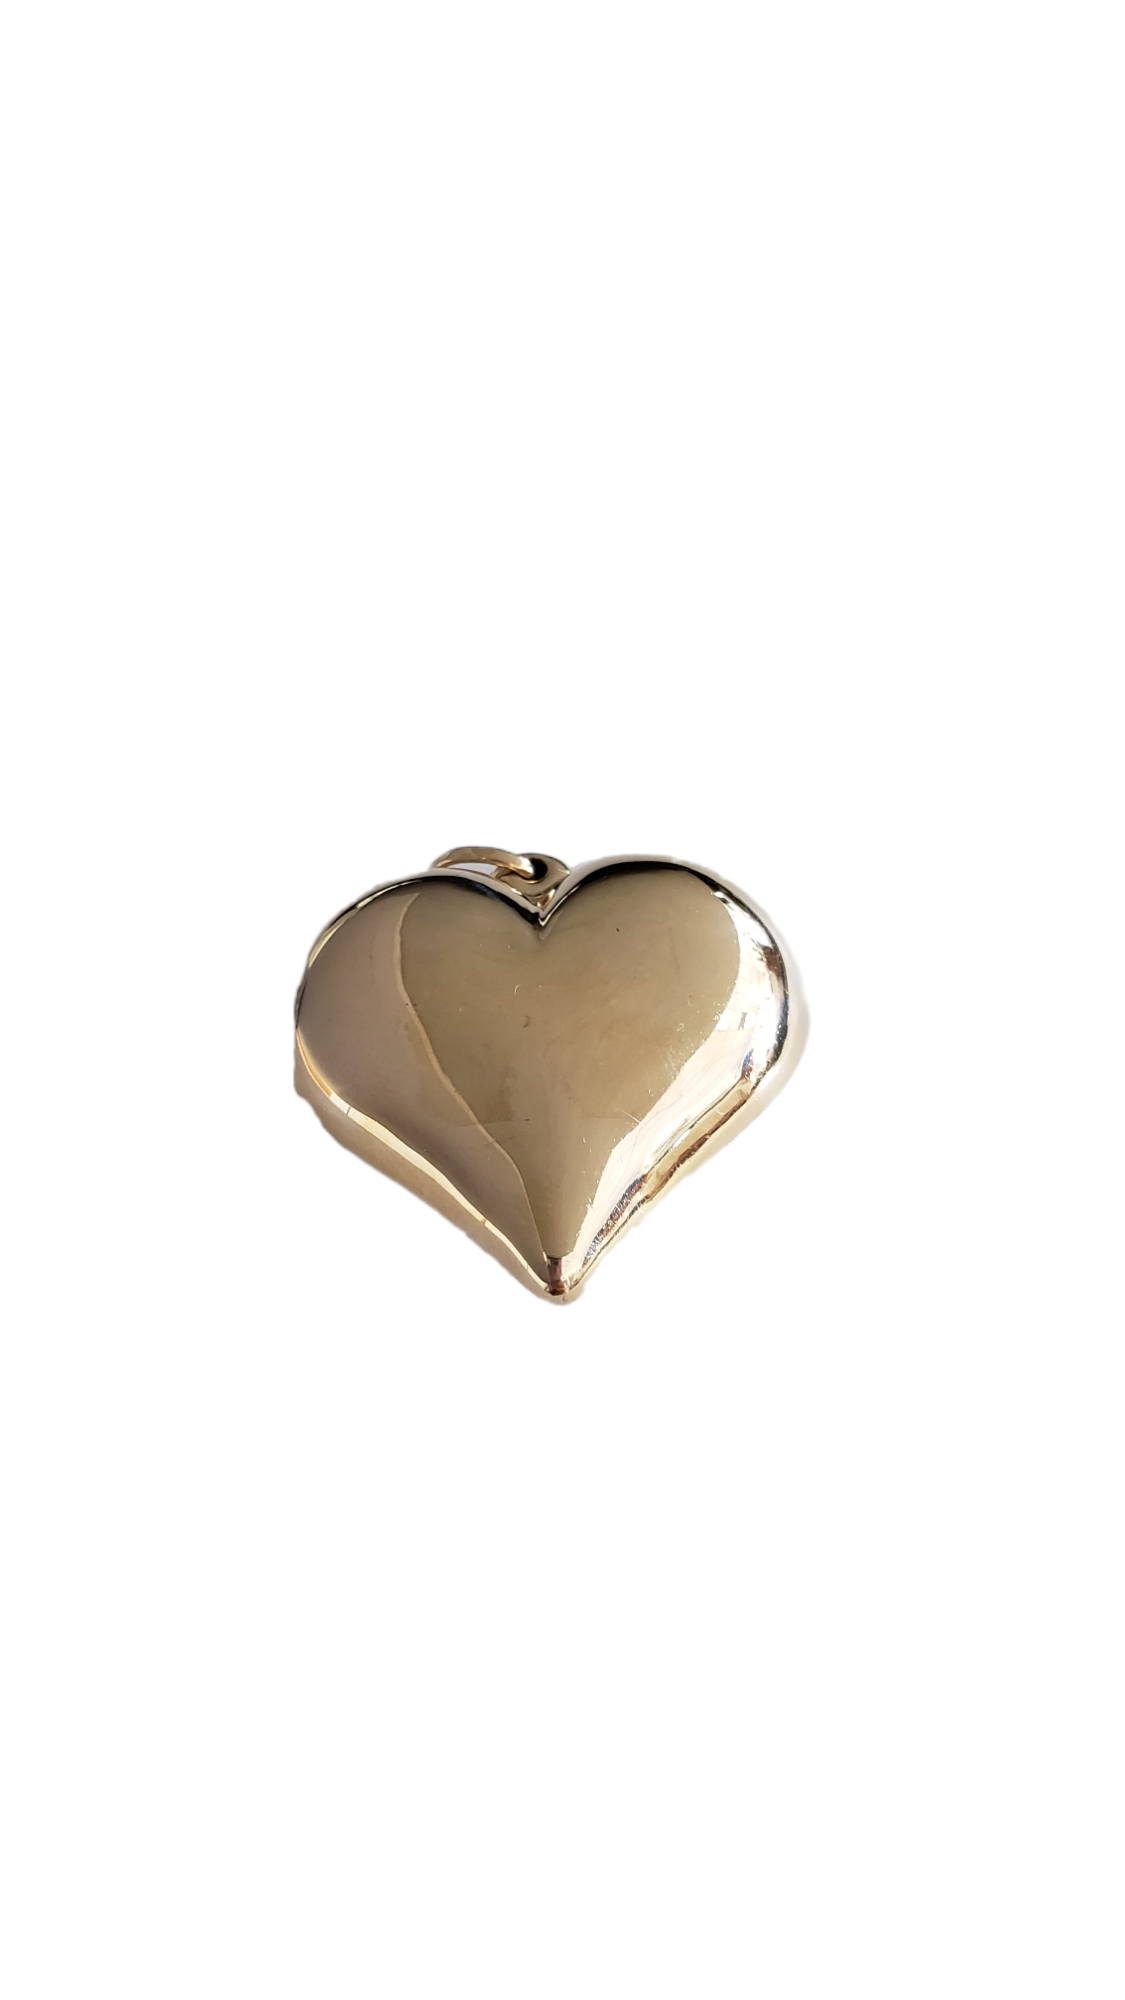 Gold Hollow Heart Pendant Brush Finish with Diamond Cut Wheat Design in 14Kt Yellow Gold